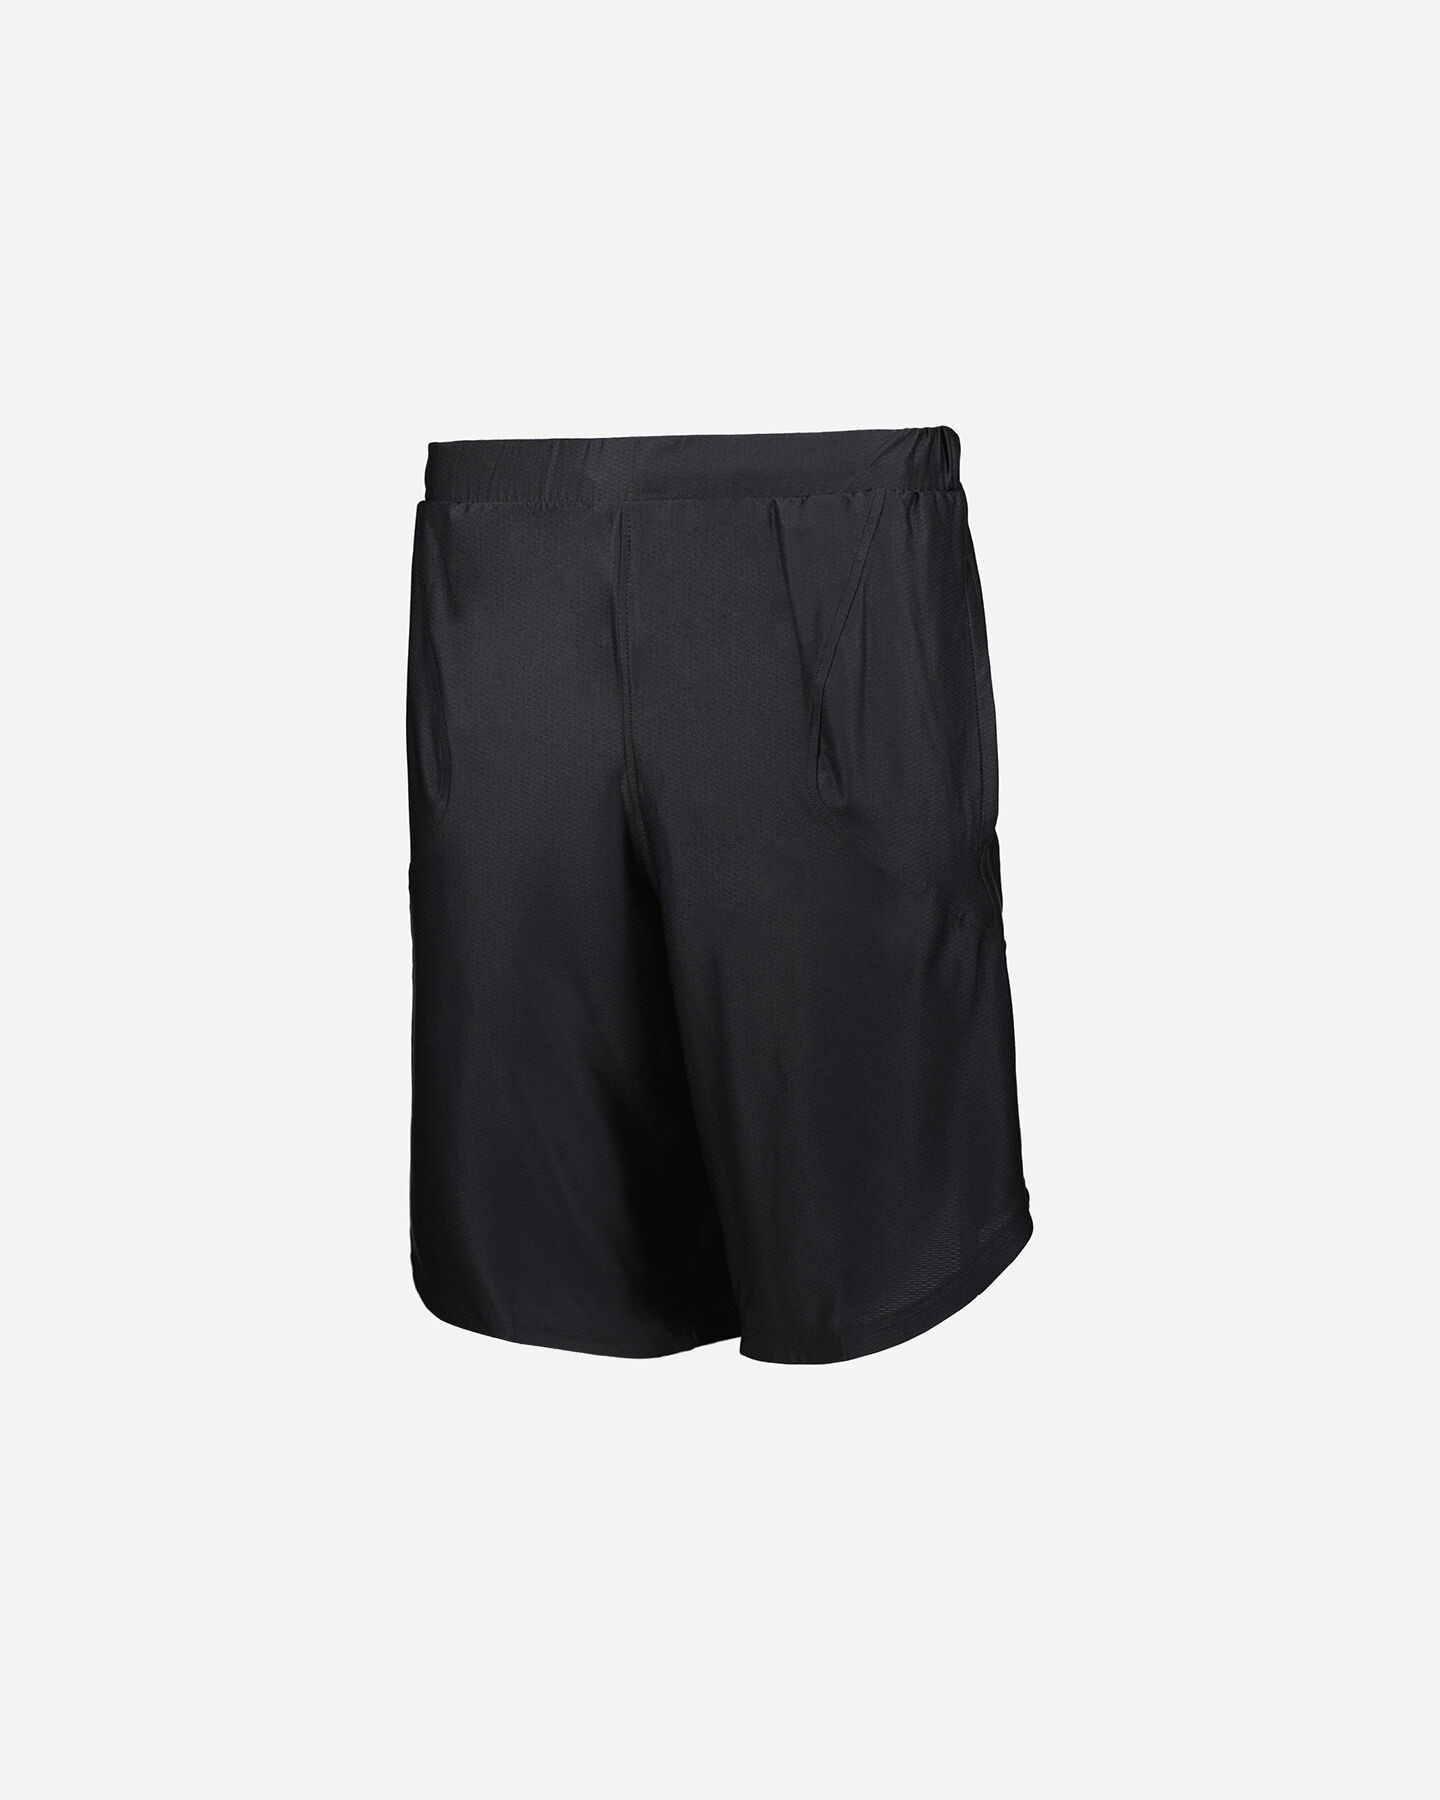  Pantaloncini basket UNDER ARMOUR ELEVATED PERFORMANCE M S5229452|0001|SM scatto 0